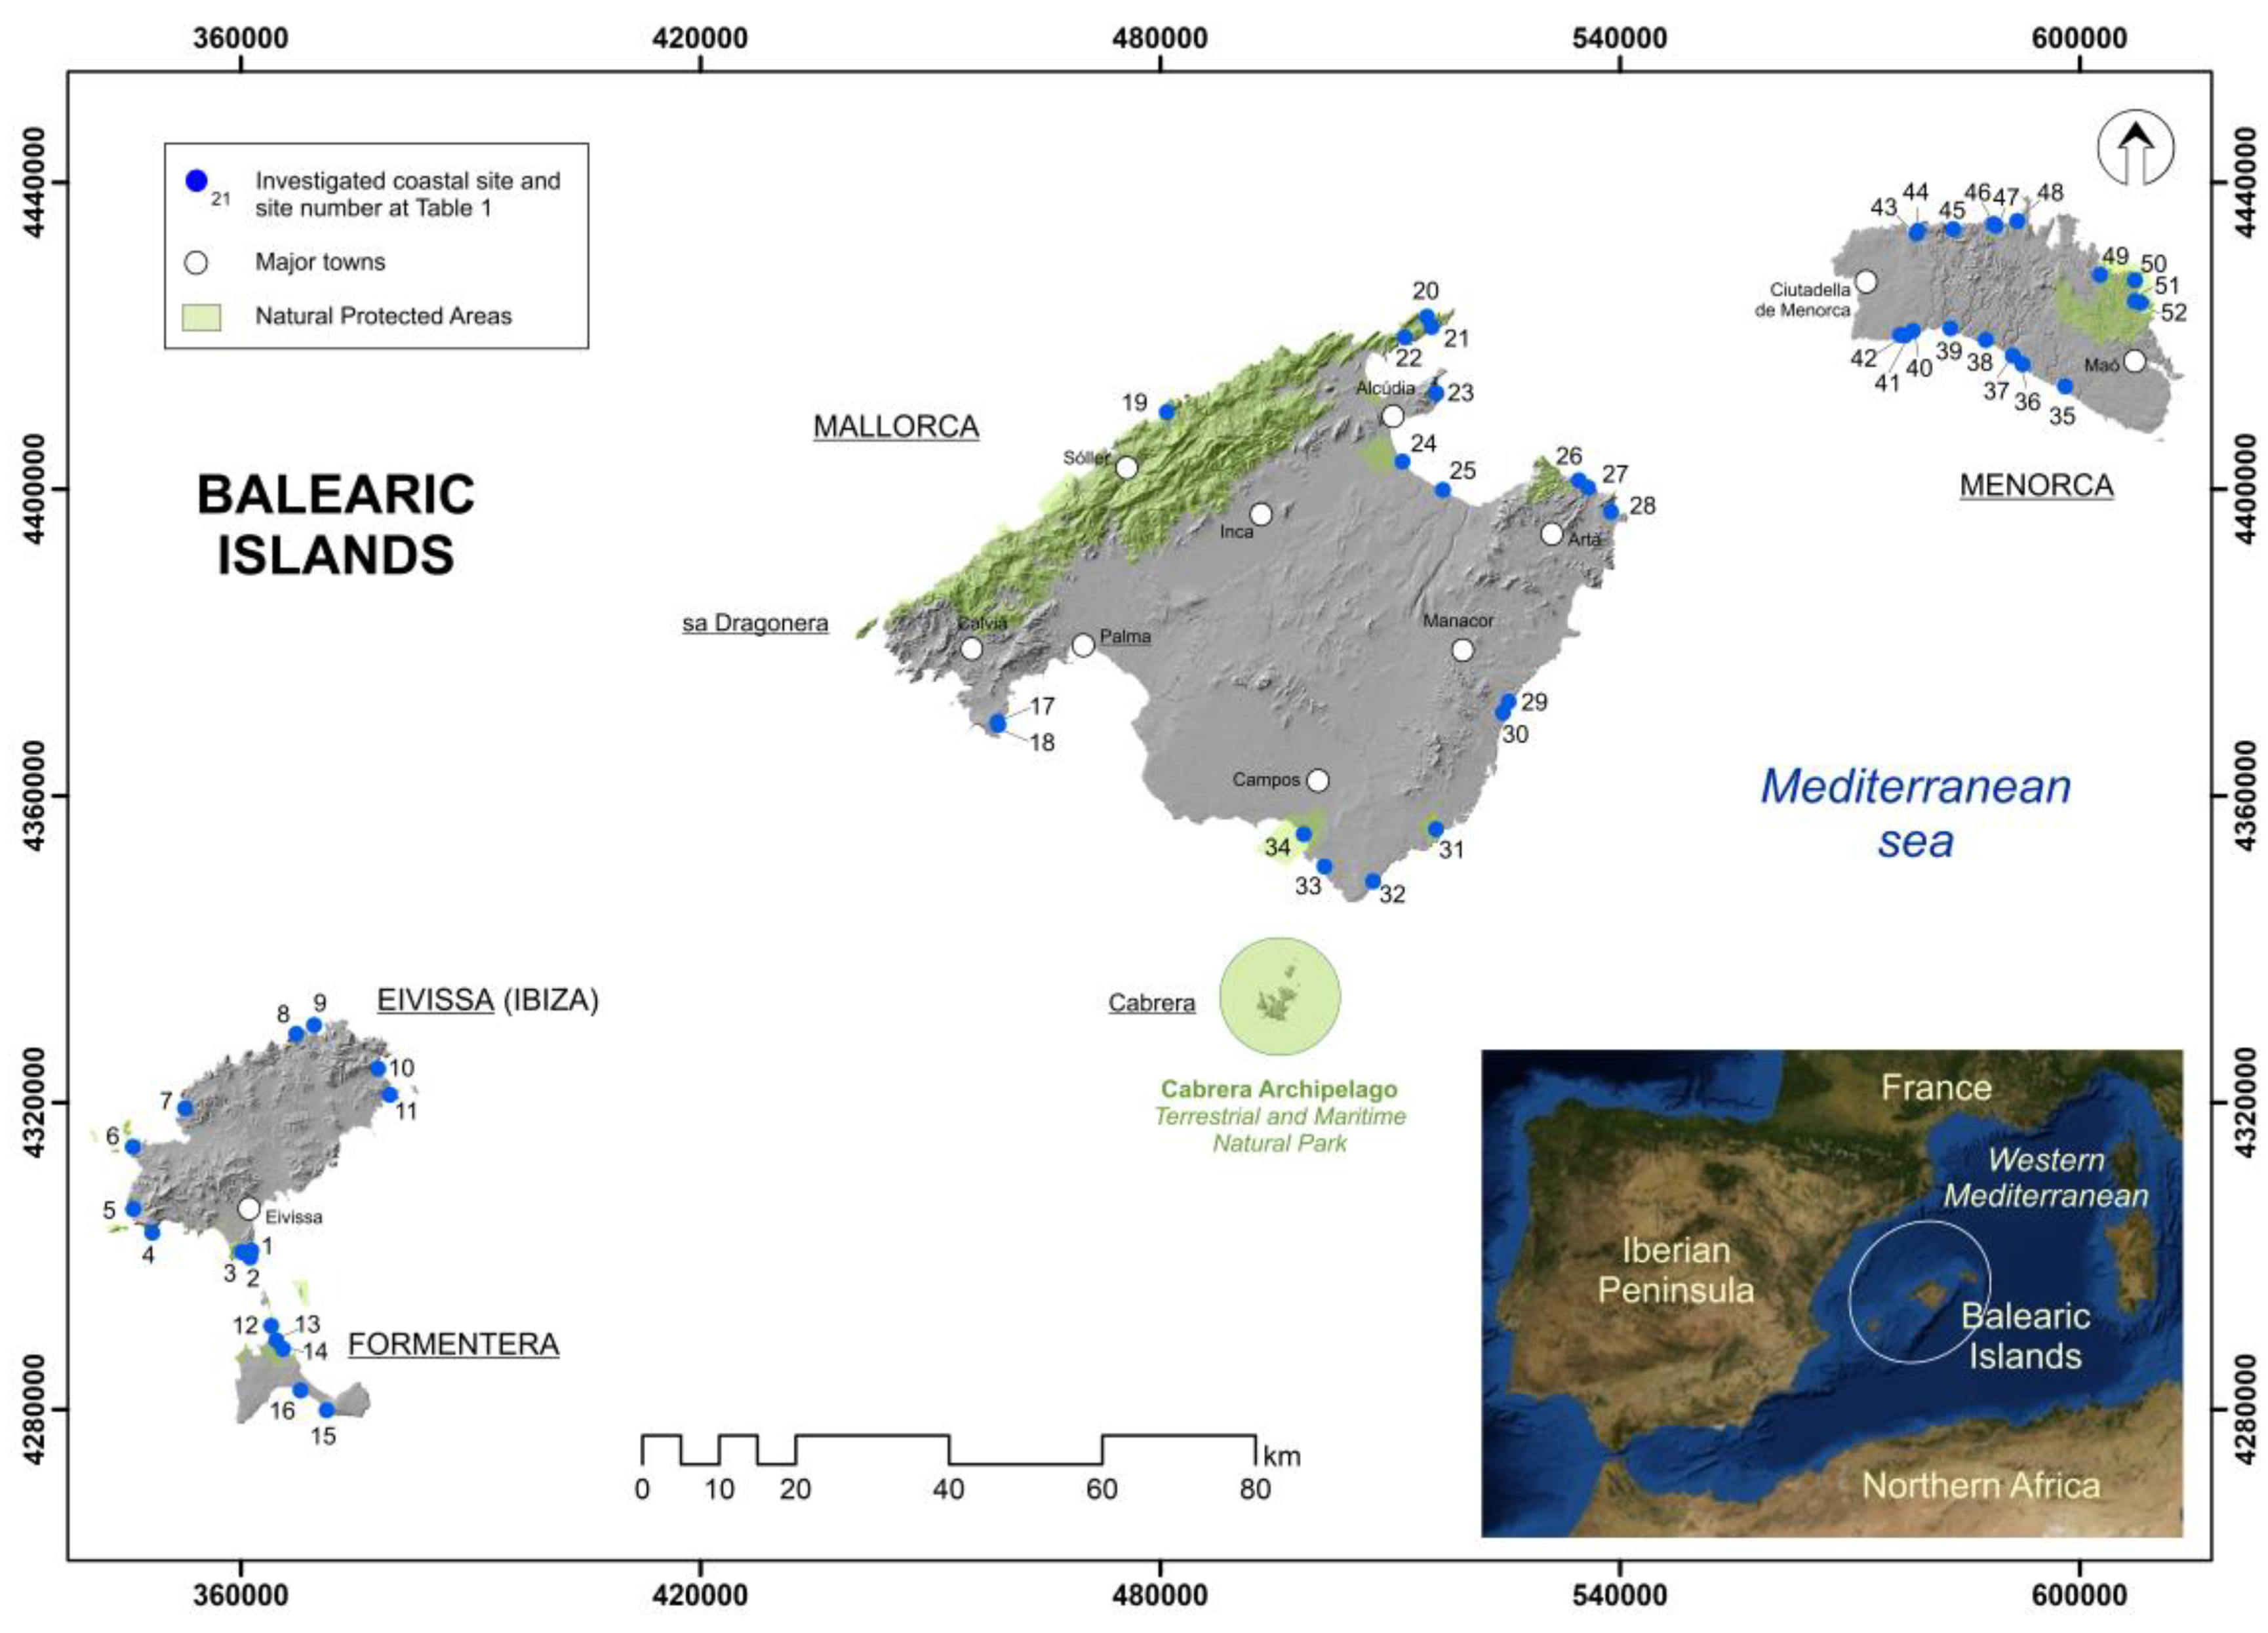 Land | Free Full-Text | Coastal Scenic Beauty and Sensitivity at the  Balearic Islands, Spain: Implication of Natural and Human Factors